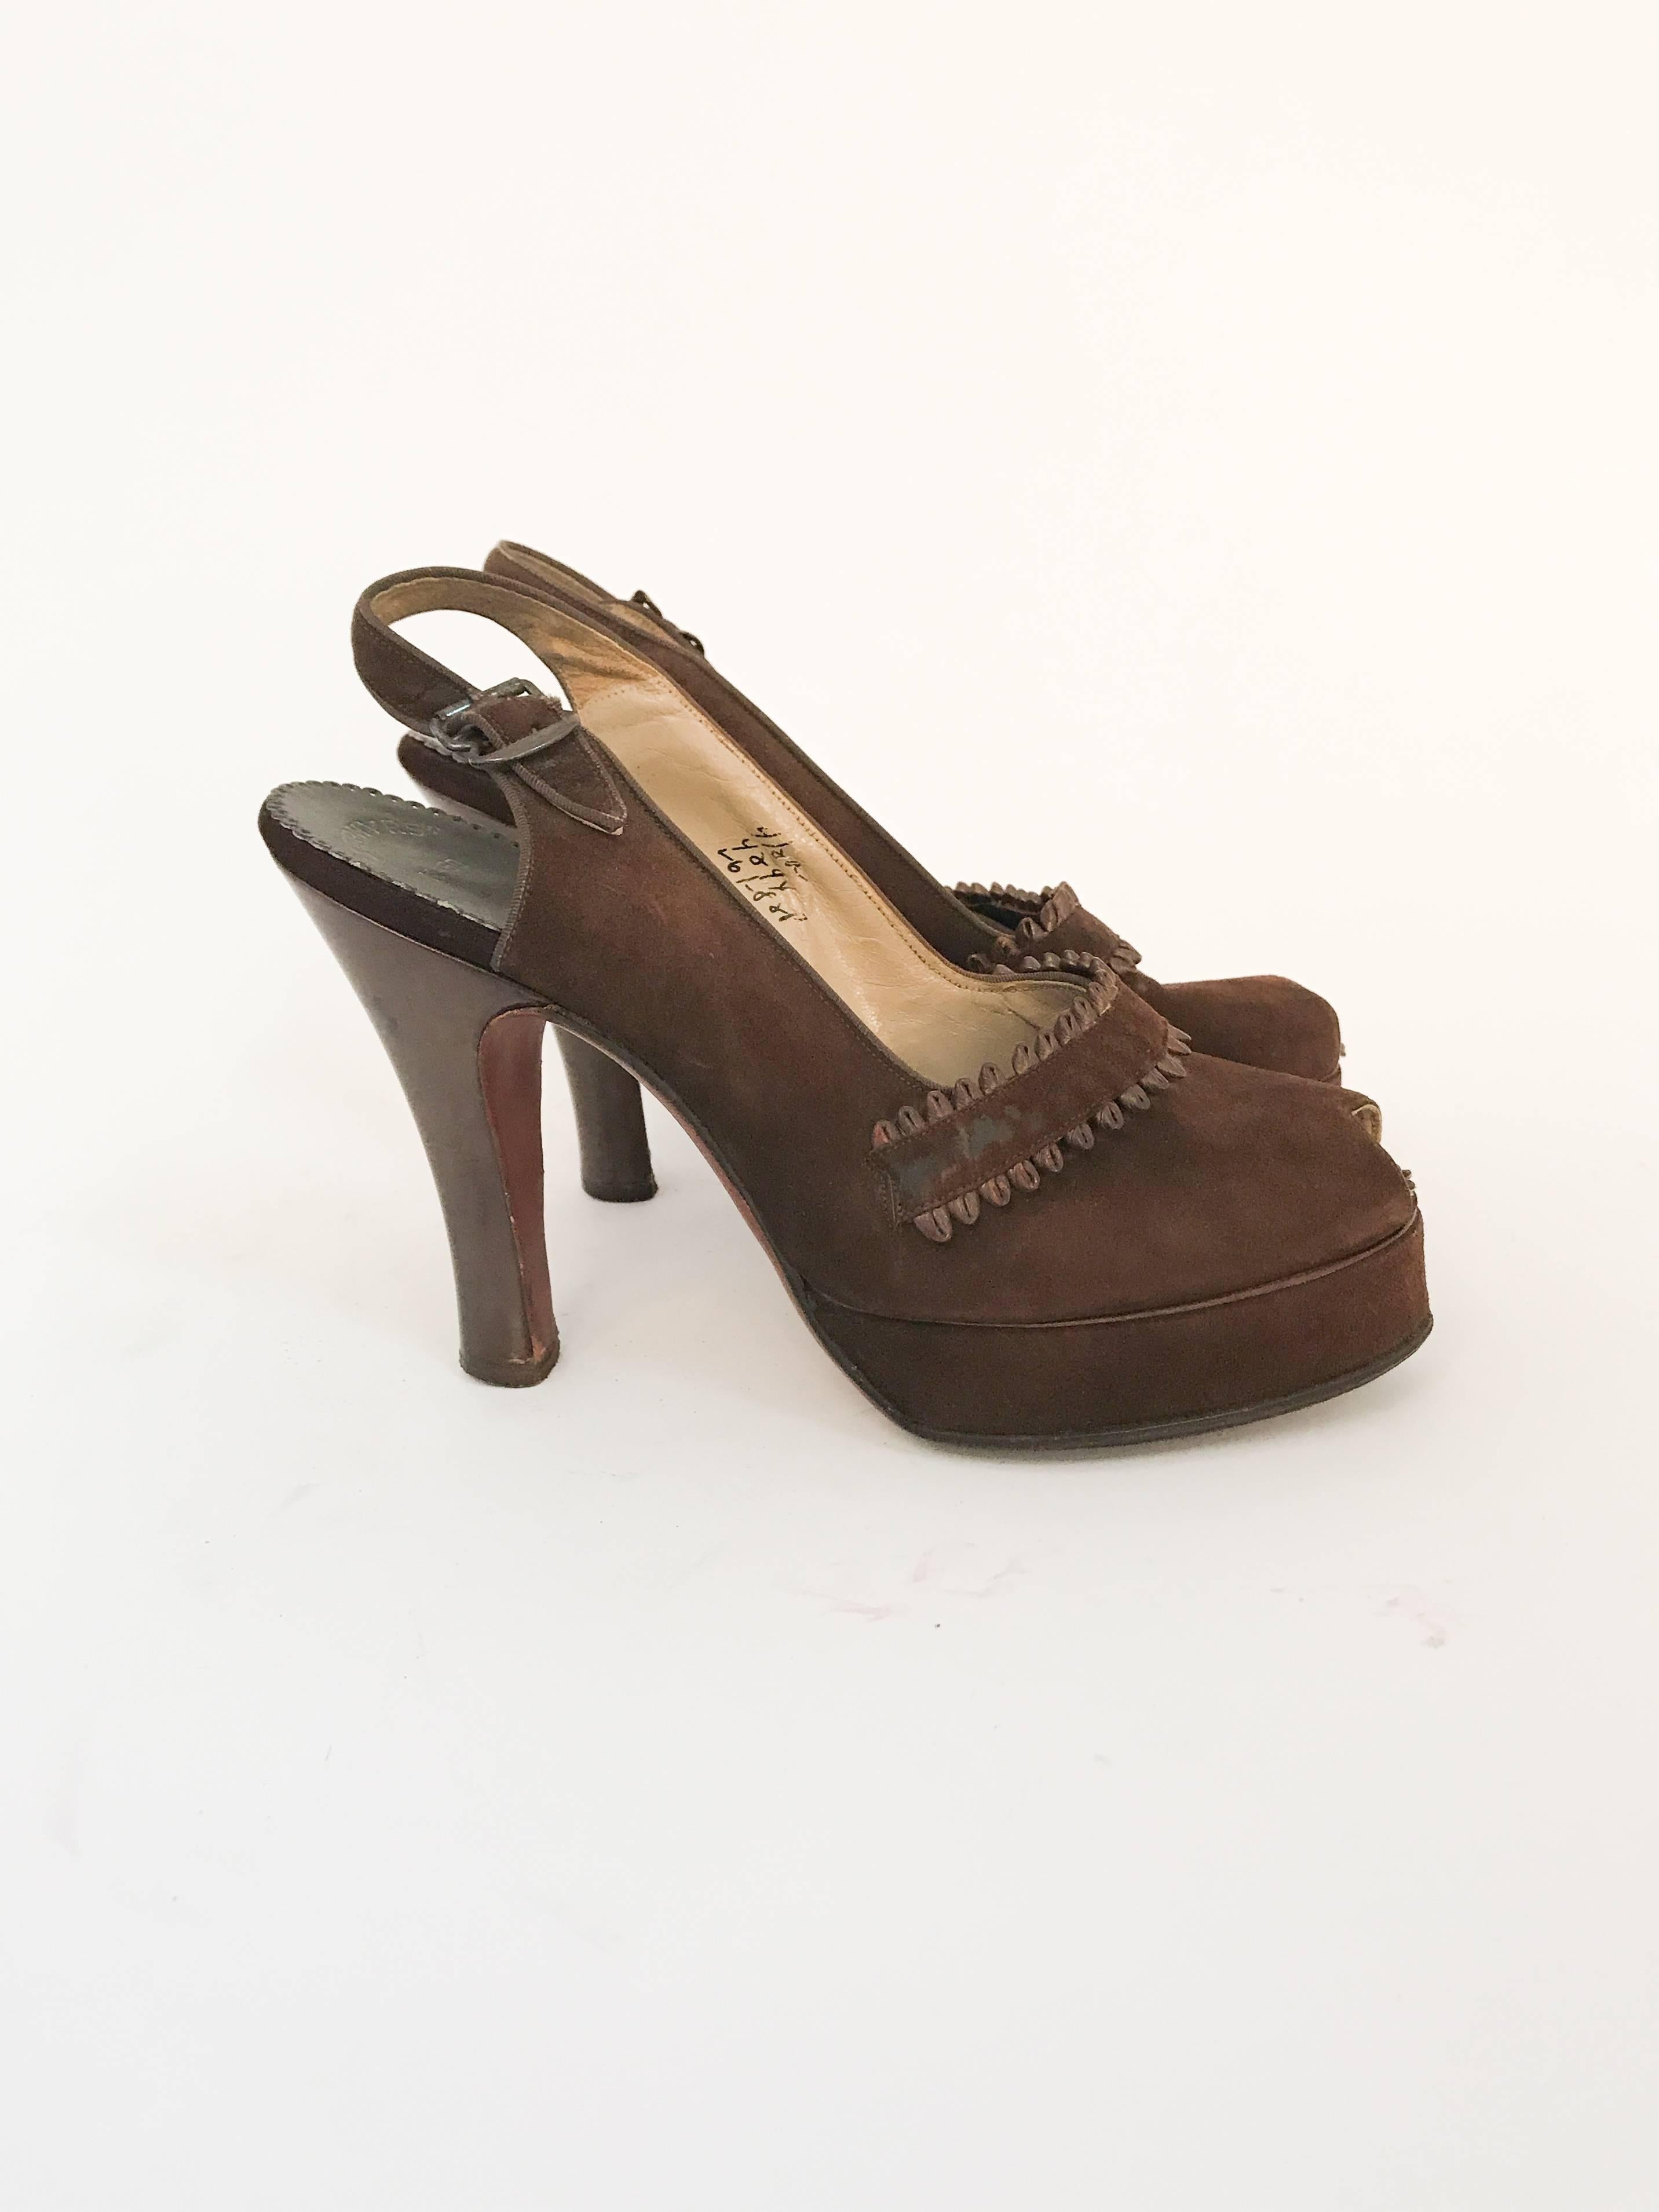 1947 Brown Suede and Leather Sling Back Heels In Good Condition For Sale In San Francisco, CA